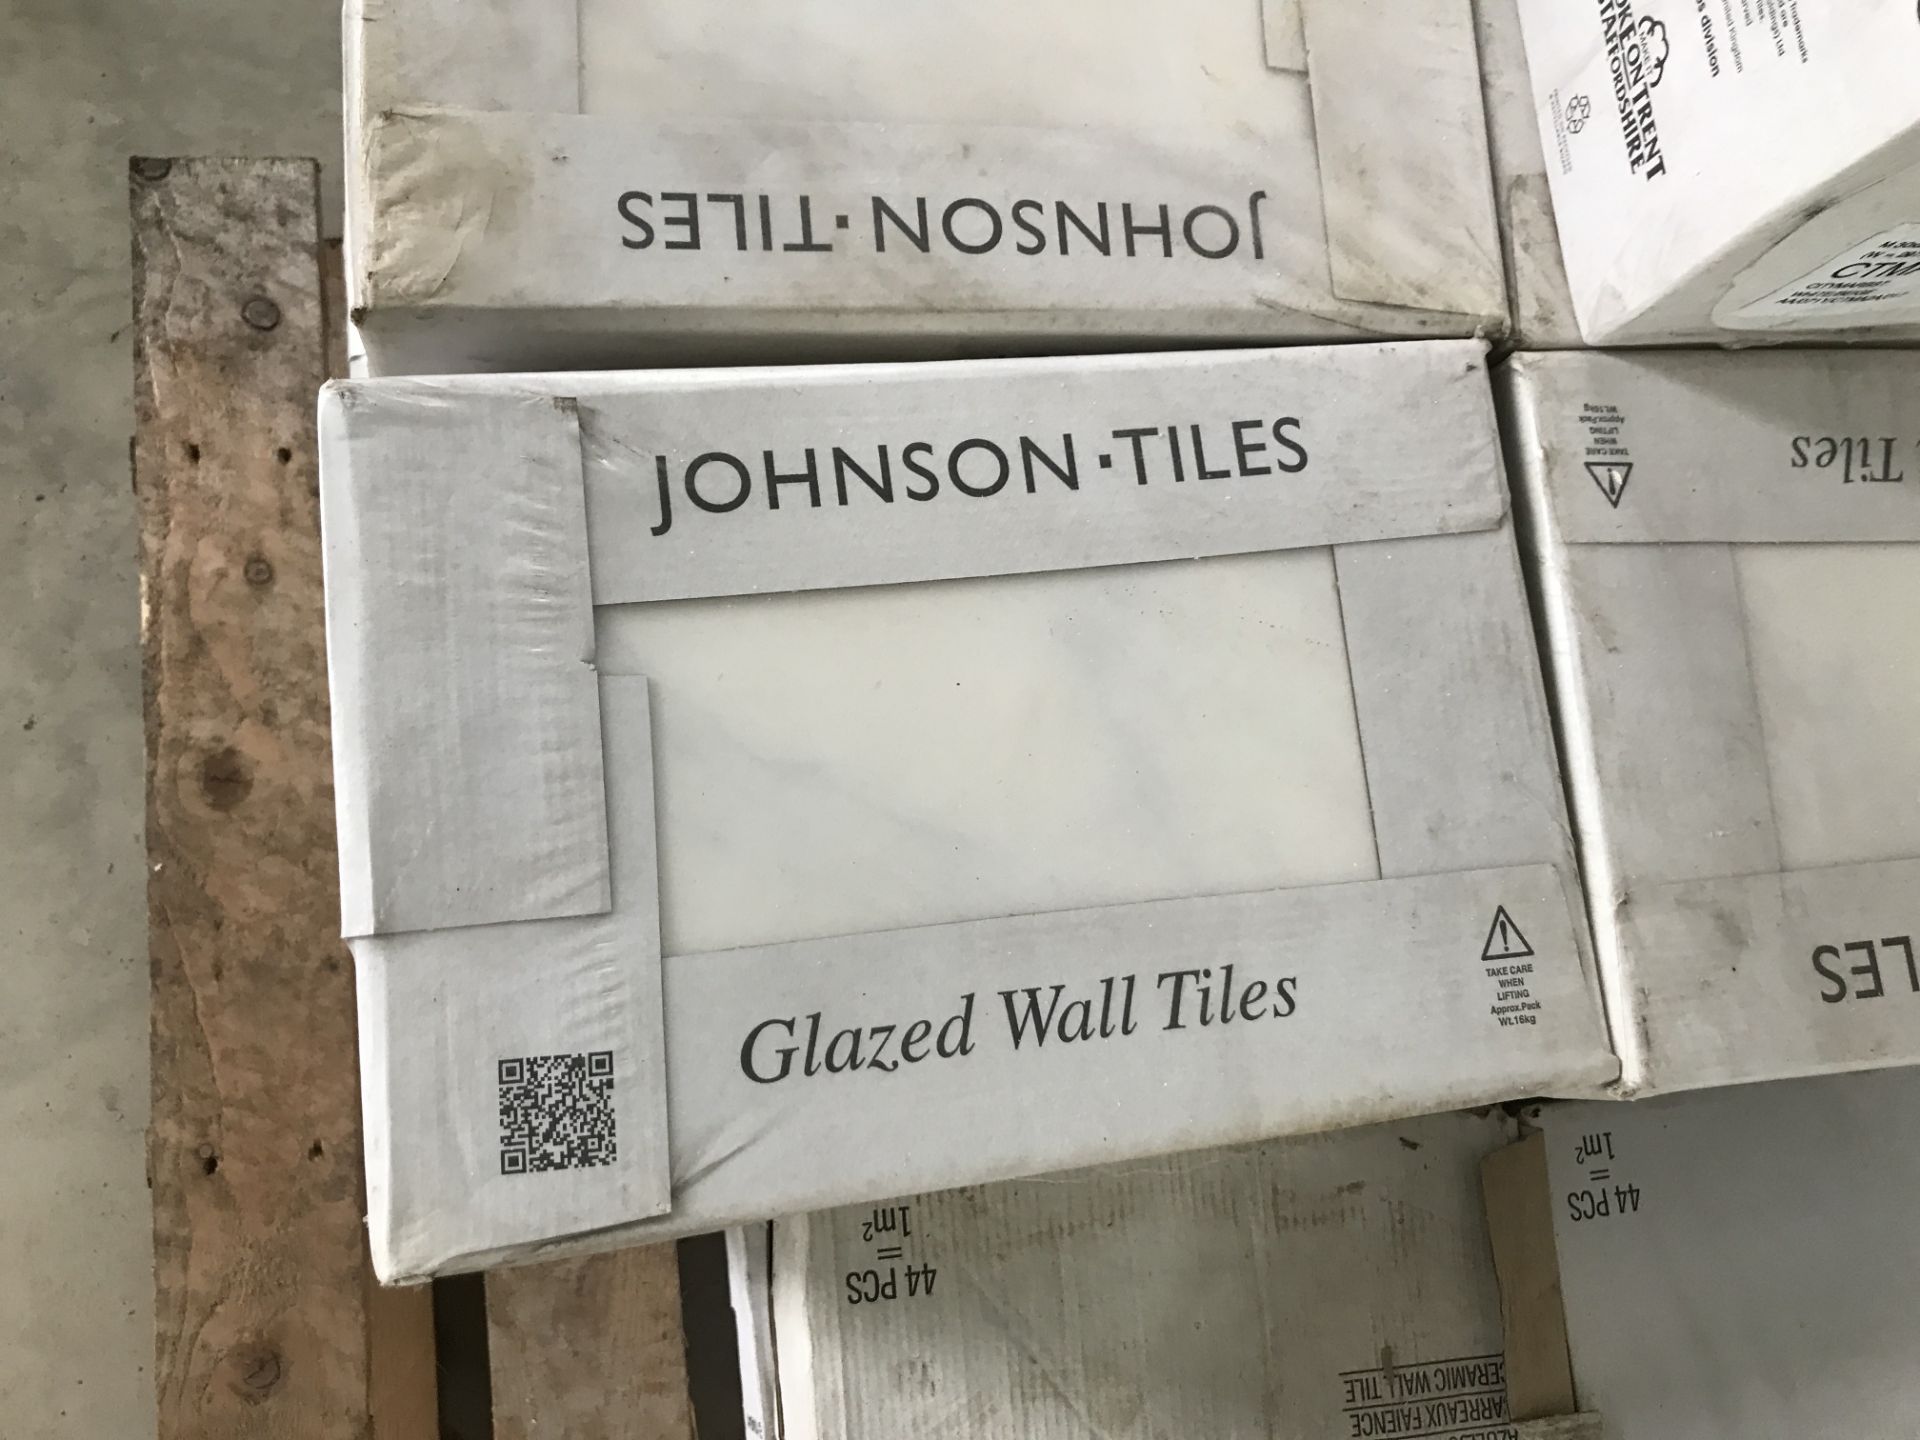 Quantity of 15 x 15 Ceramic Wall Tiles and Johnson Tiles Glazed Wall Tiles, as set out on pallet - Bild 3 aus 3